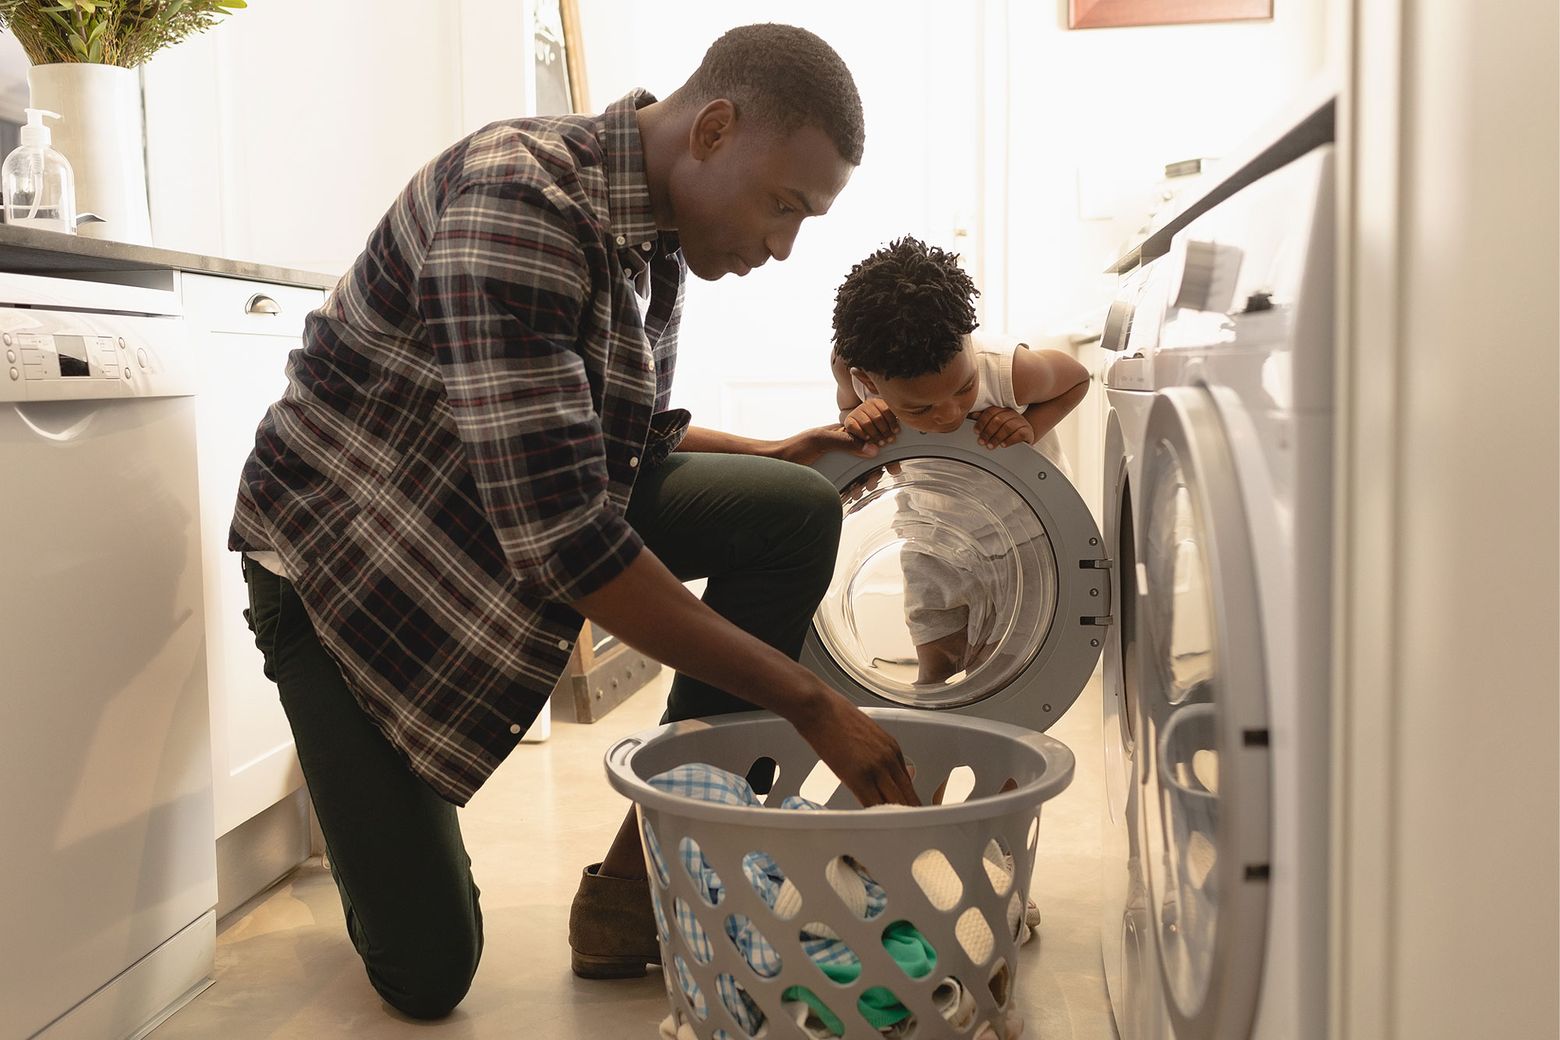 25 Laundry Products To Make The Chore Easier